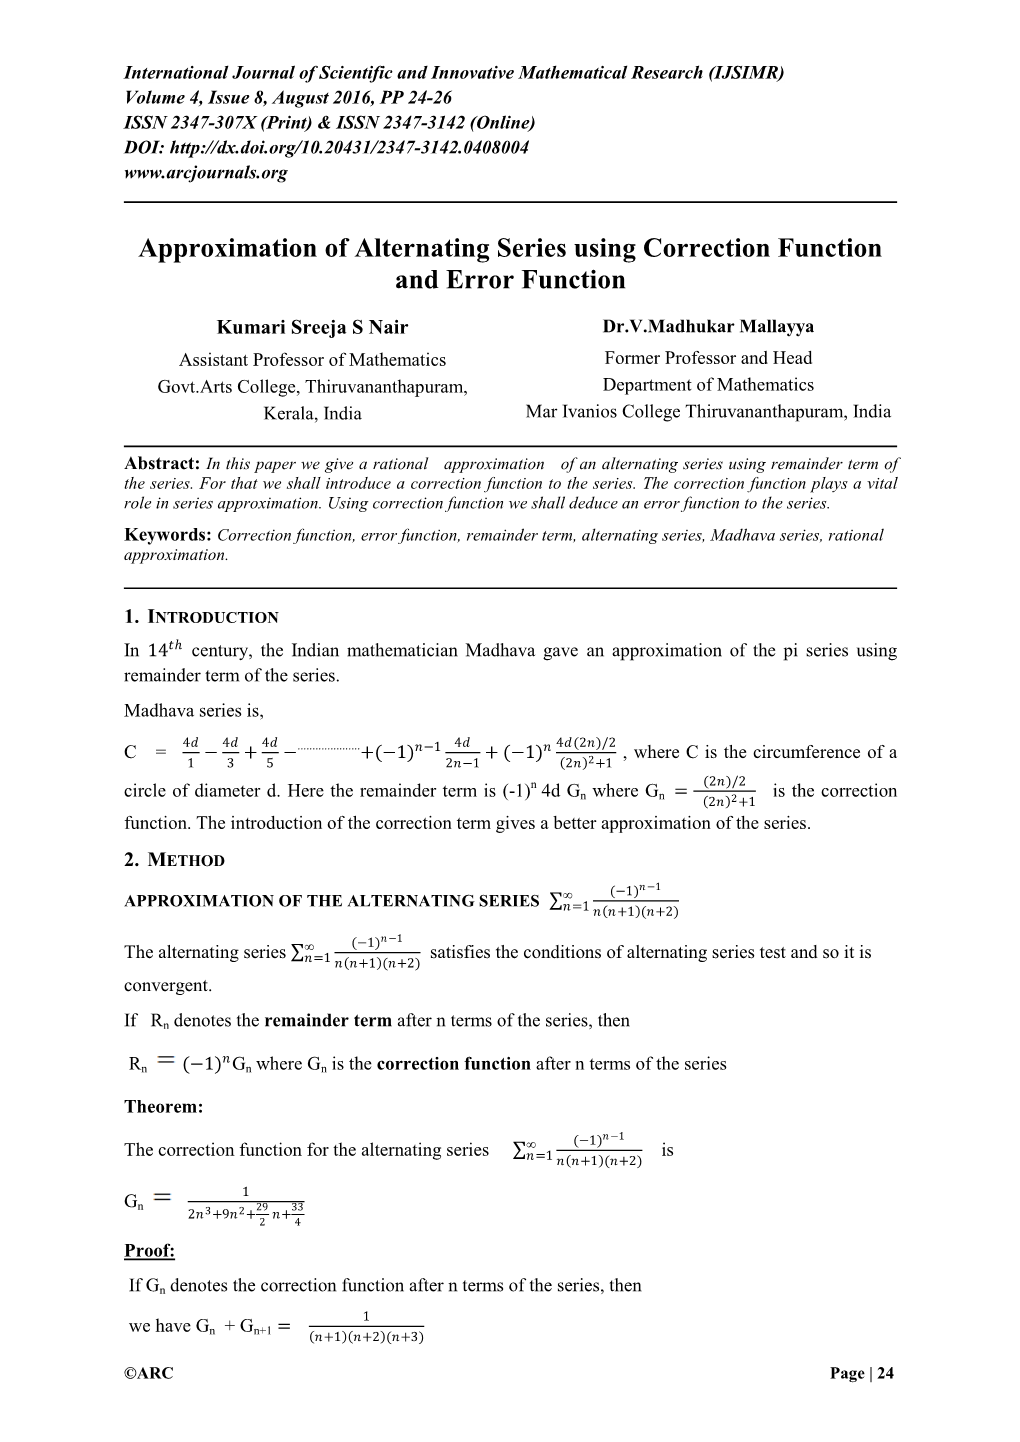 Approximation of Alternating Series Using Correction Function and Error Function